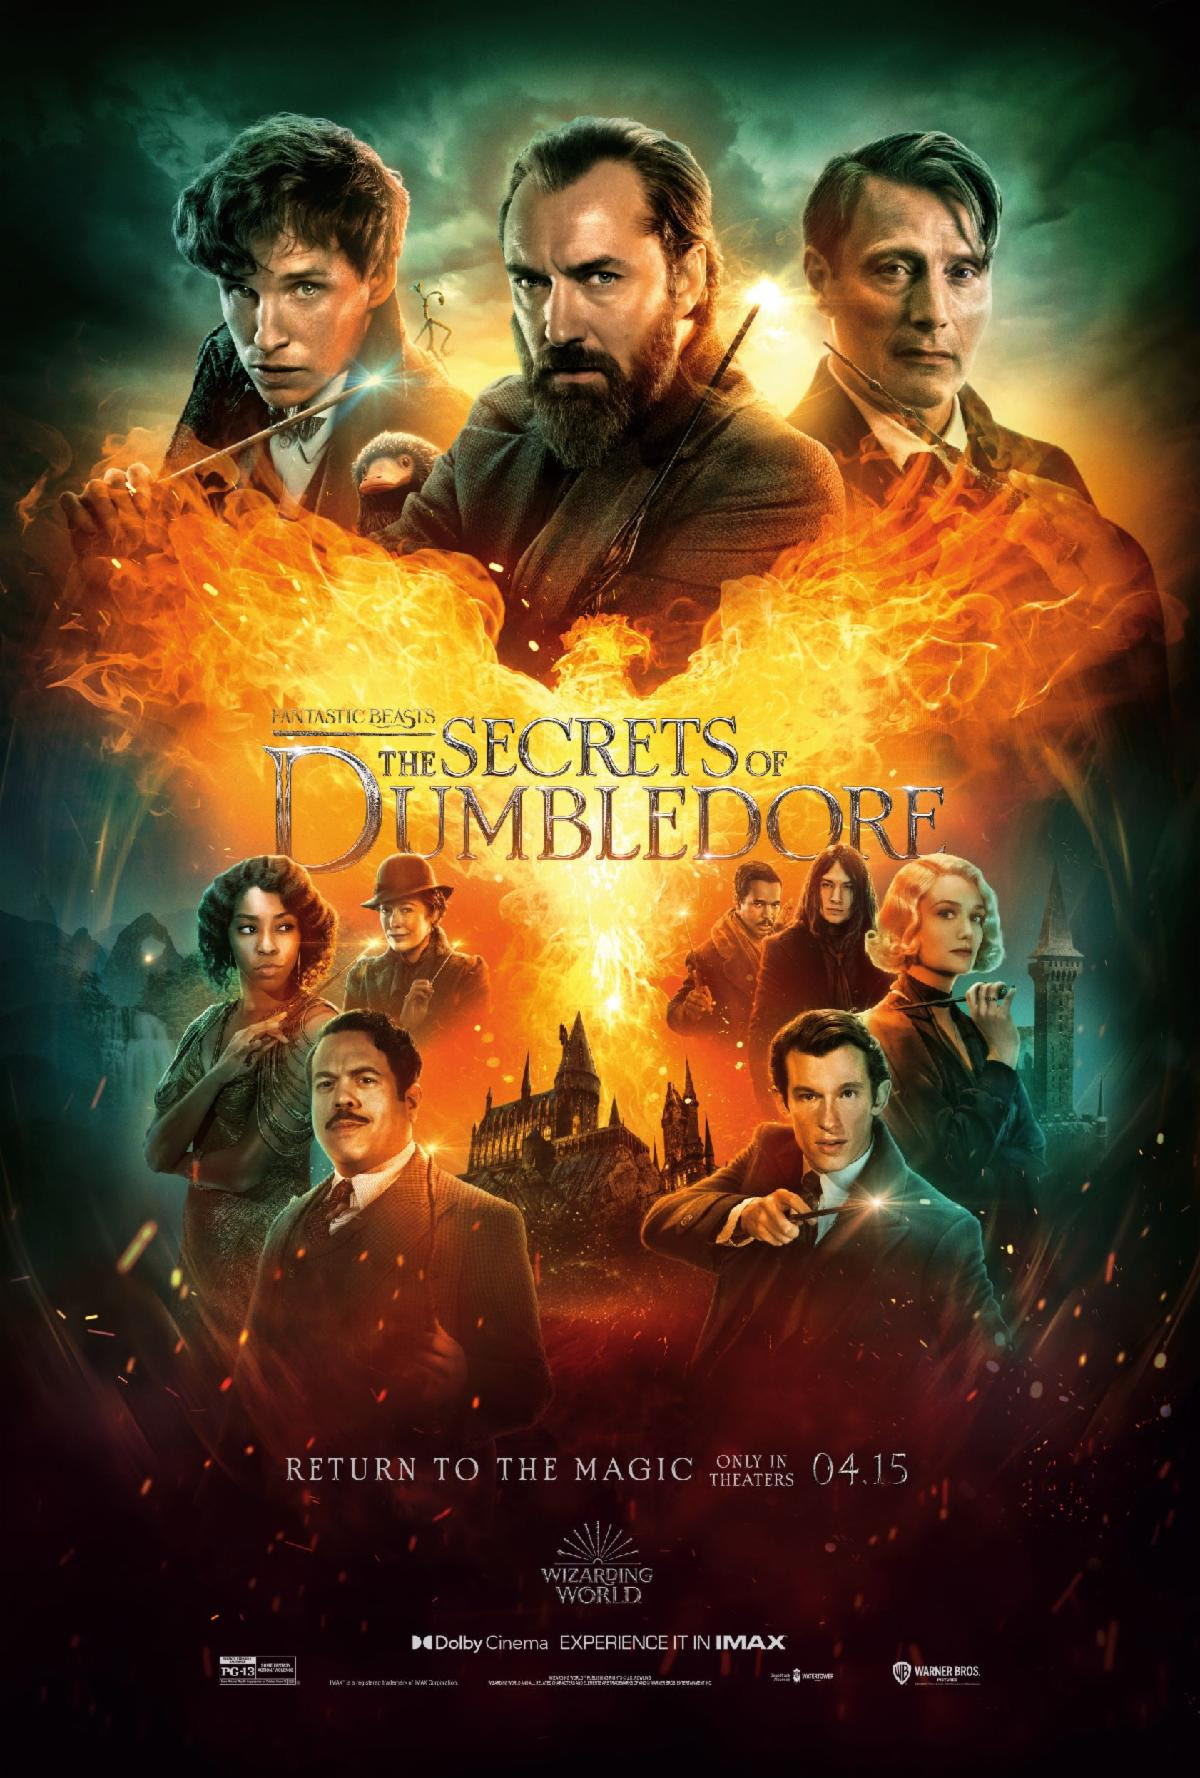 The Secrets of Dumbledore Movie Review